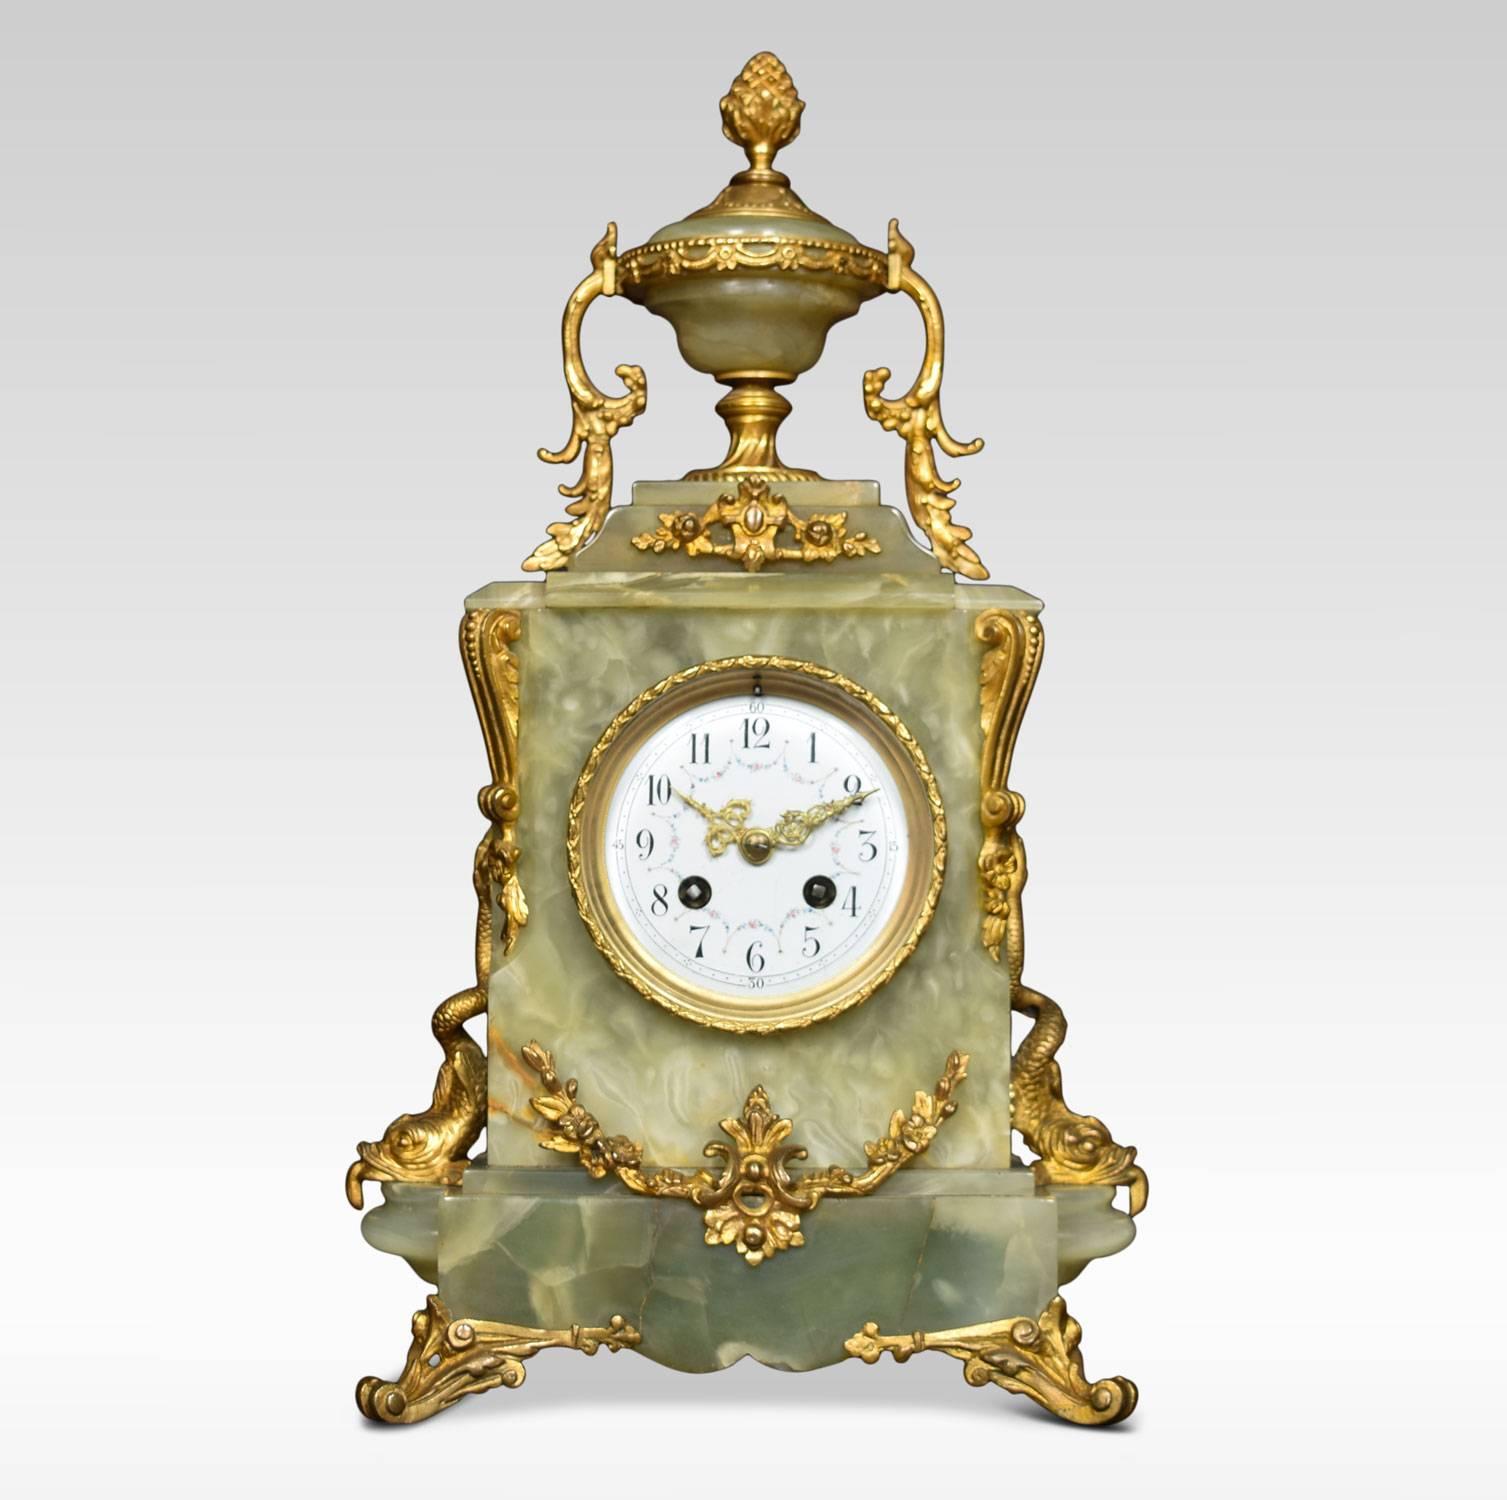 19th century French onyx and gilt metal clock set, the white enamel dial decorated with floral detail, the eight day movement striking on a bell, the clock case crested with pineapple finial urn with dolphin supports to the sides terminating in